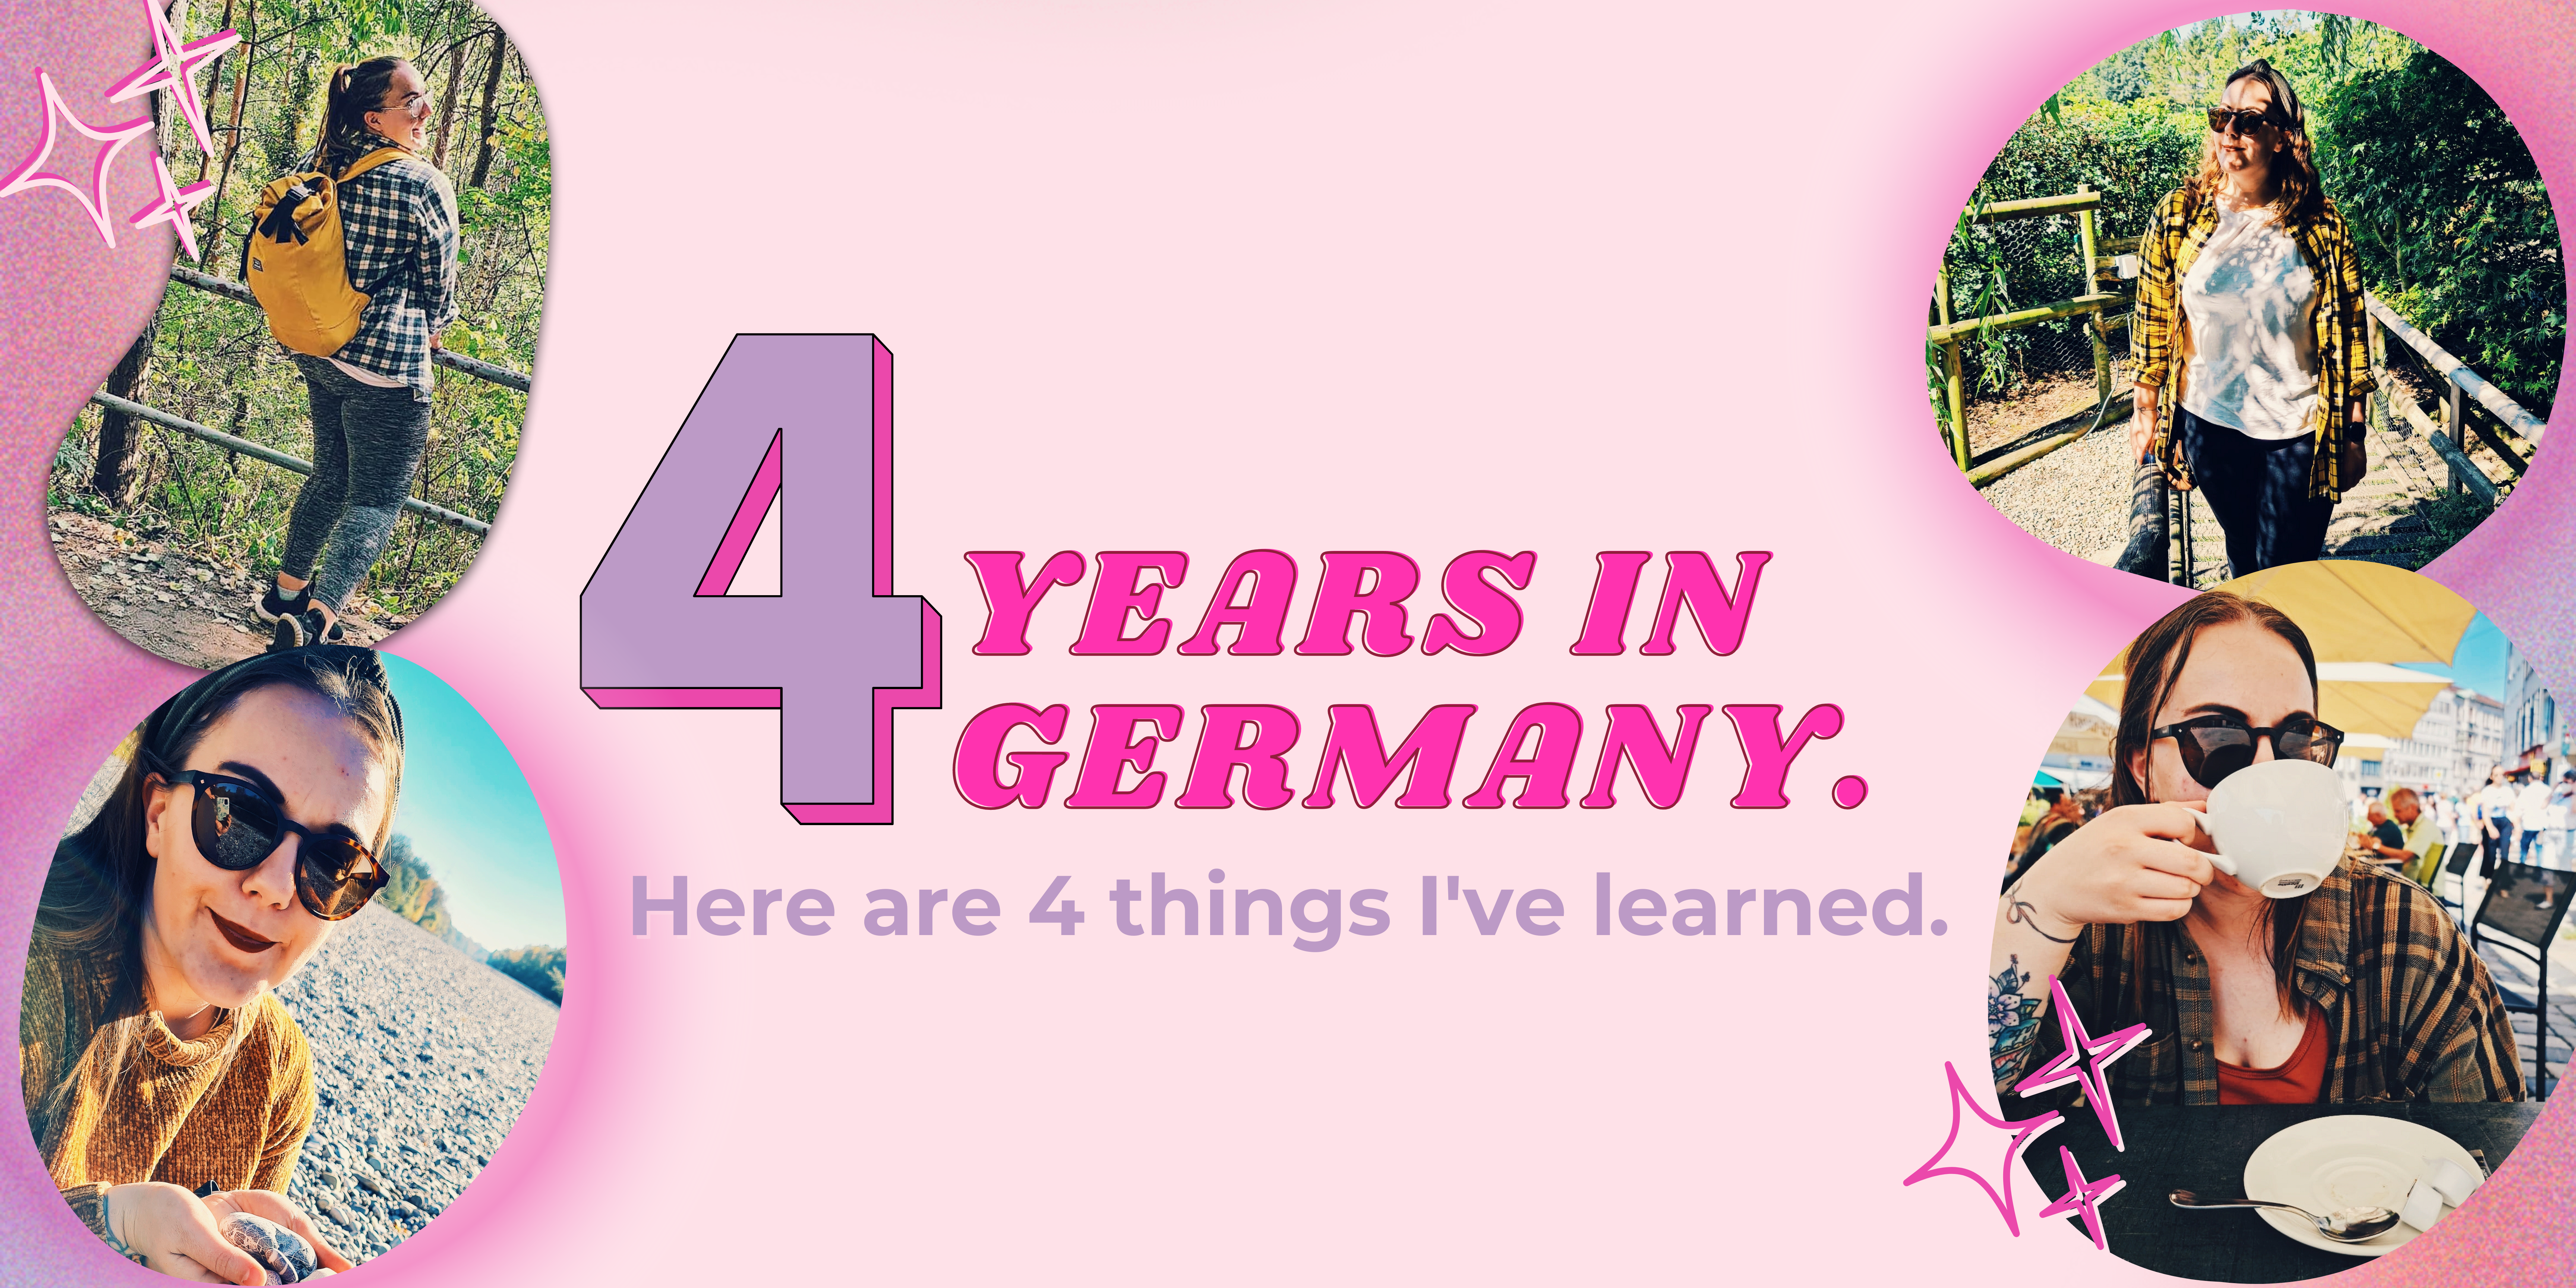 4 big lessons from 4 long years in Germany